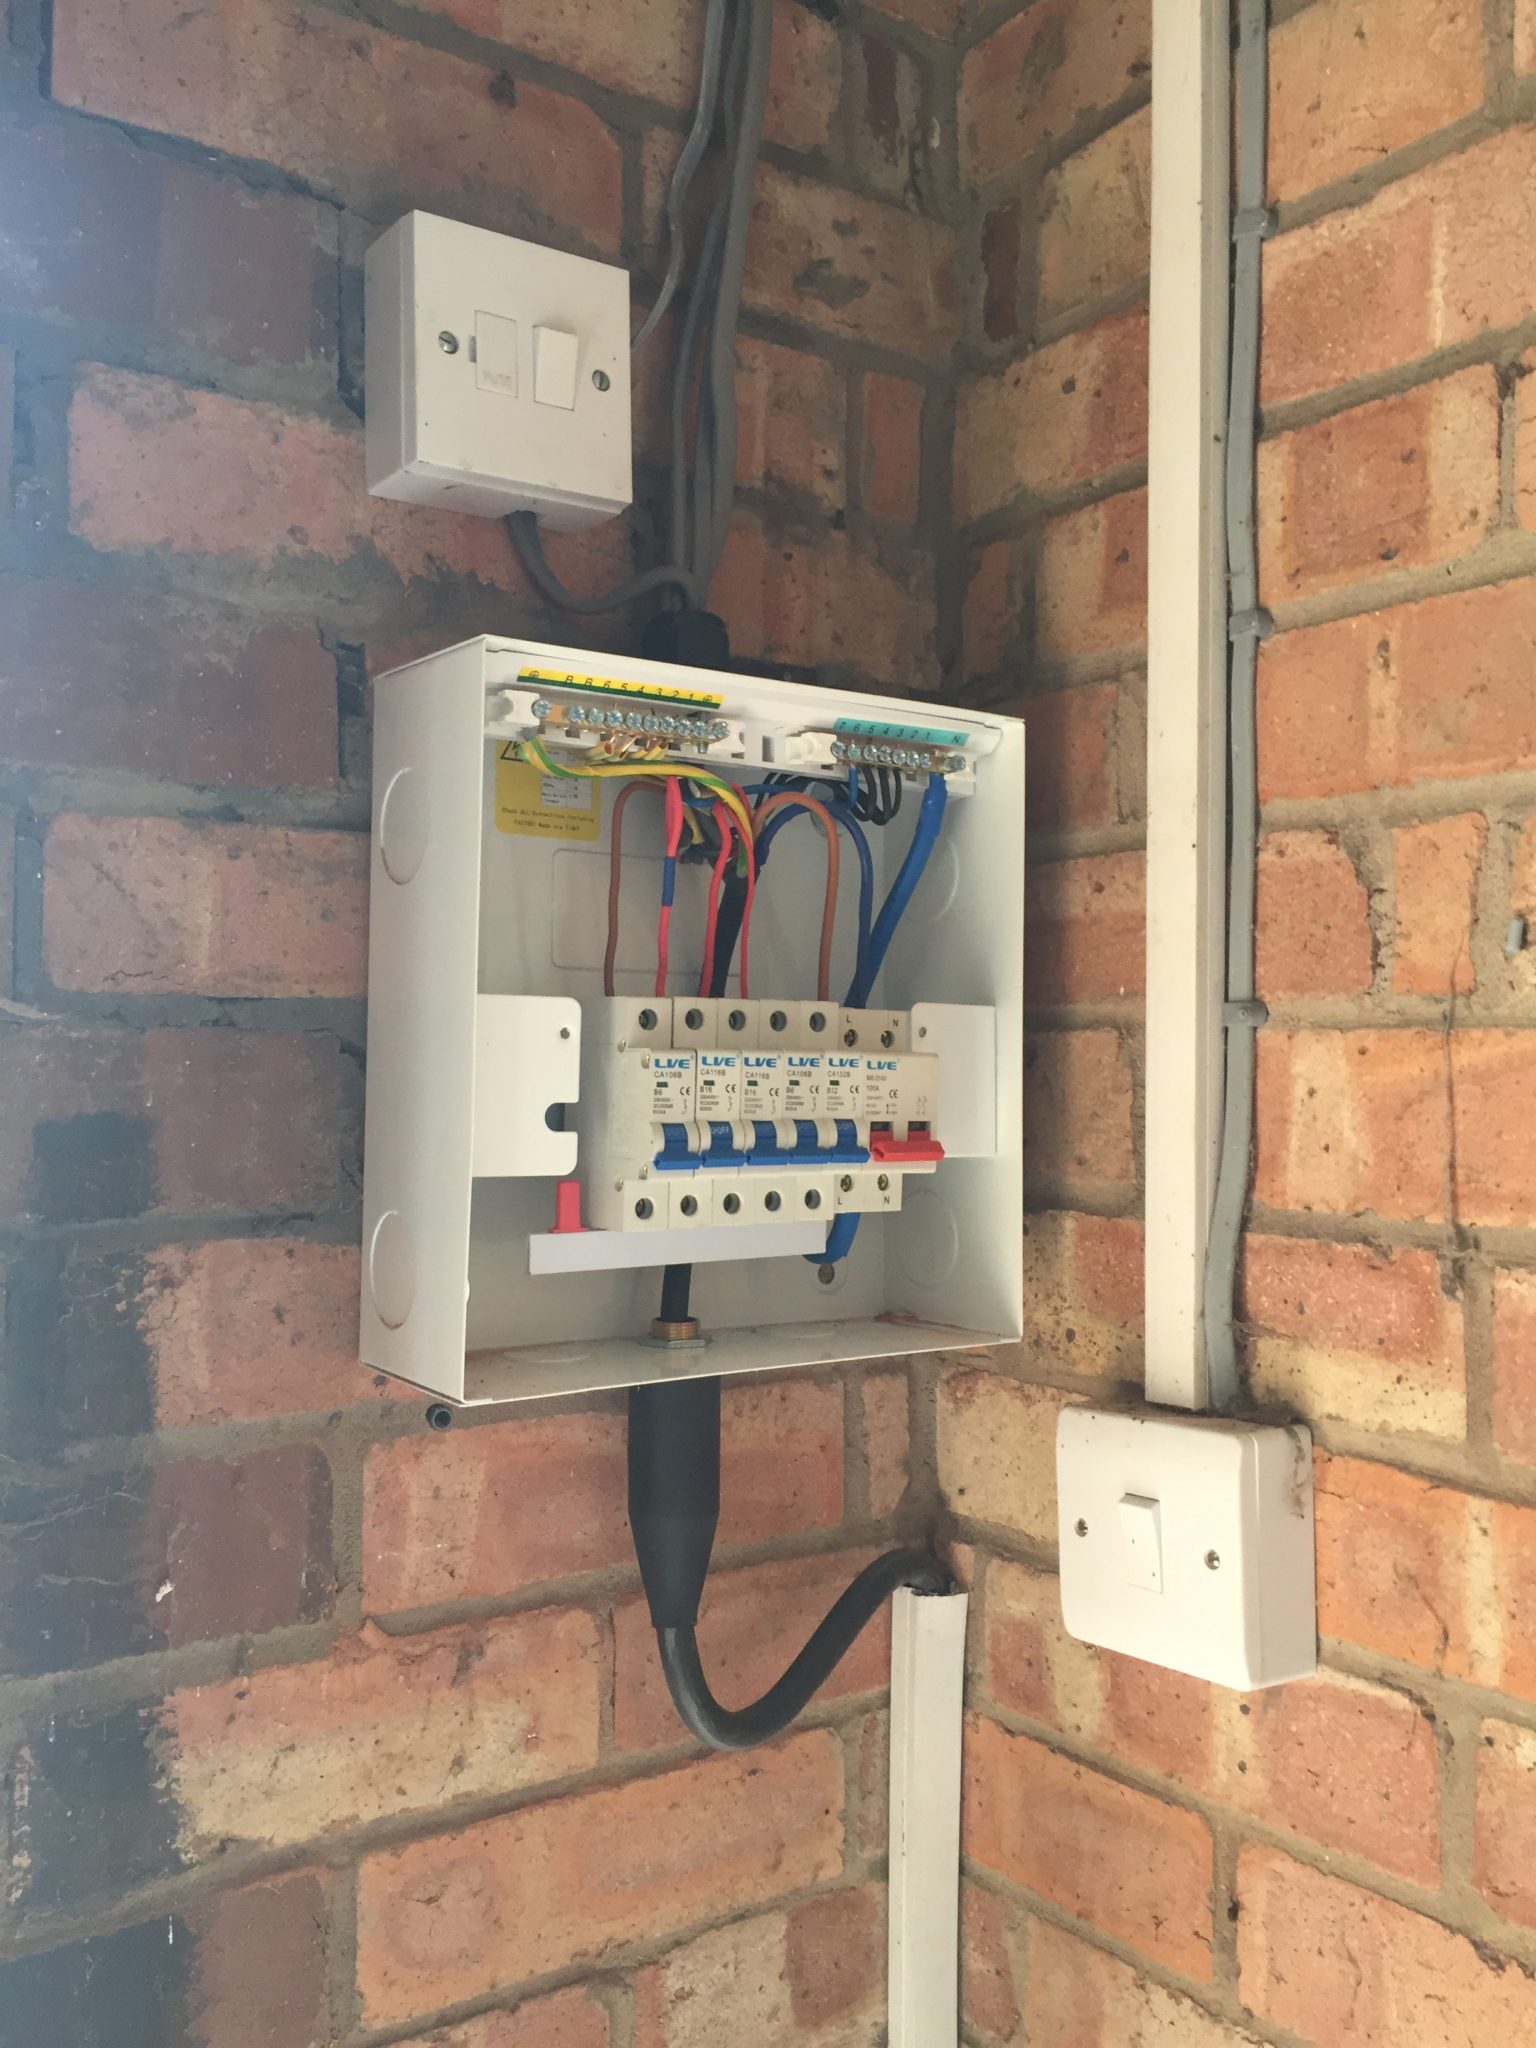 updating the garage or shed consumer unit case & young